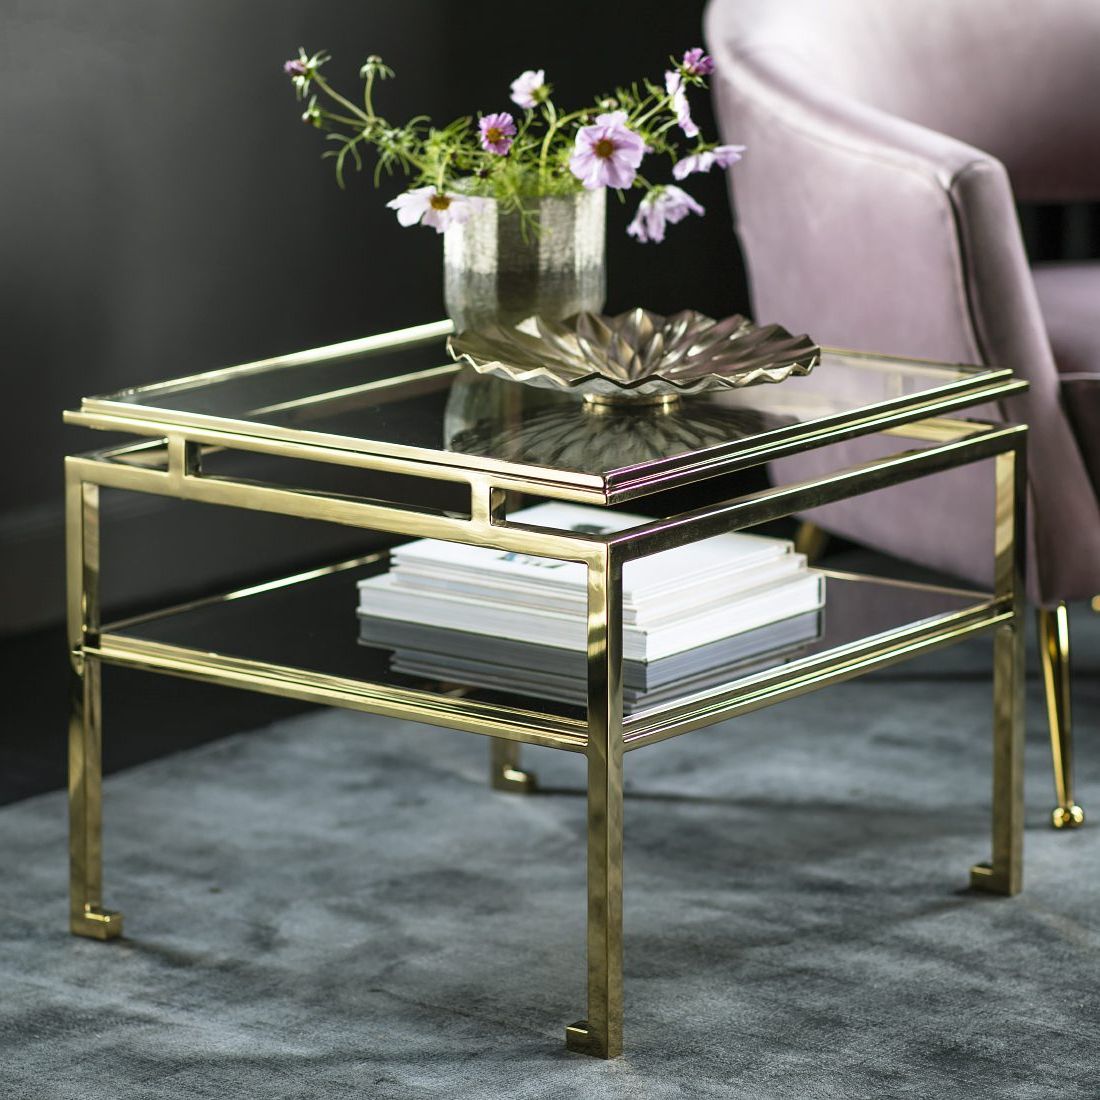 Gold And Glass Coffee Tables – Unfollow Coffee Table Glass To Stop Within 2020 Glass And Gold Coffee Tables (View 9 of 10)